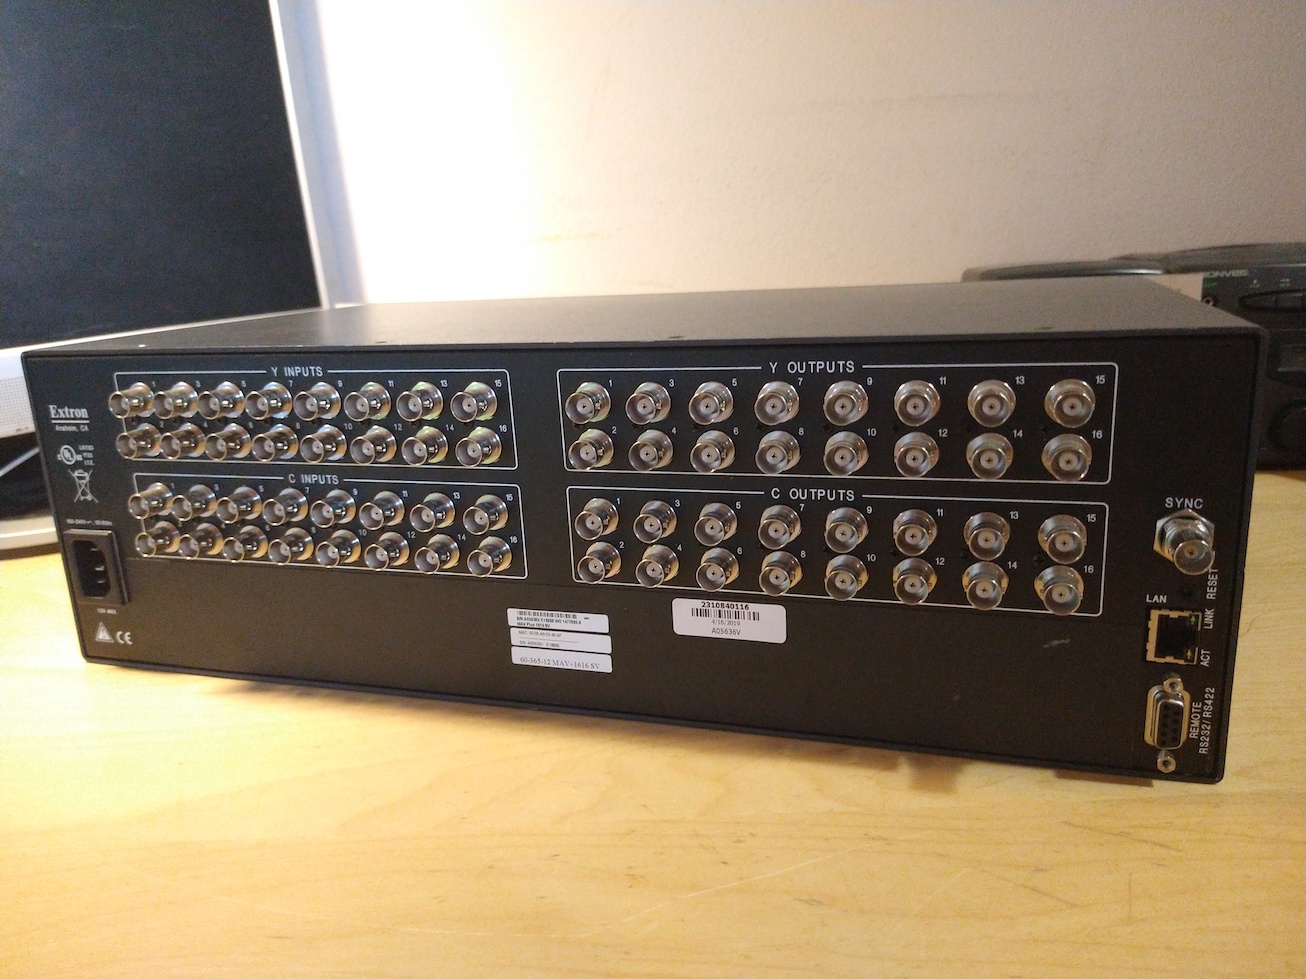 A rear view of the Extron maxtrix switcher. There are 64 BNC connections in total for video, divided between luma and chroma inputs and outputs. There is also a sync input, and DE-9 and RJ45 ports for remote control.